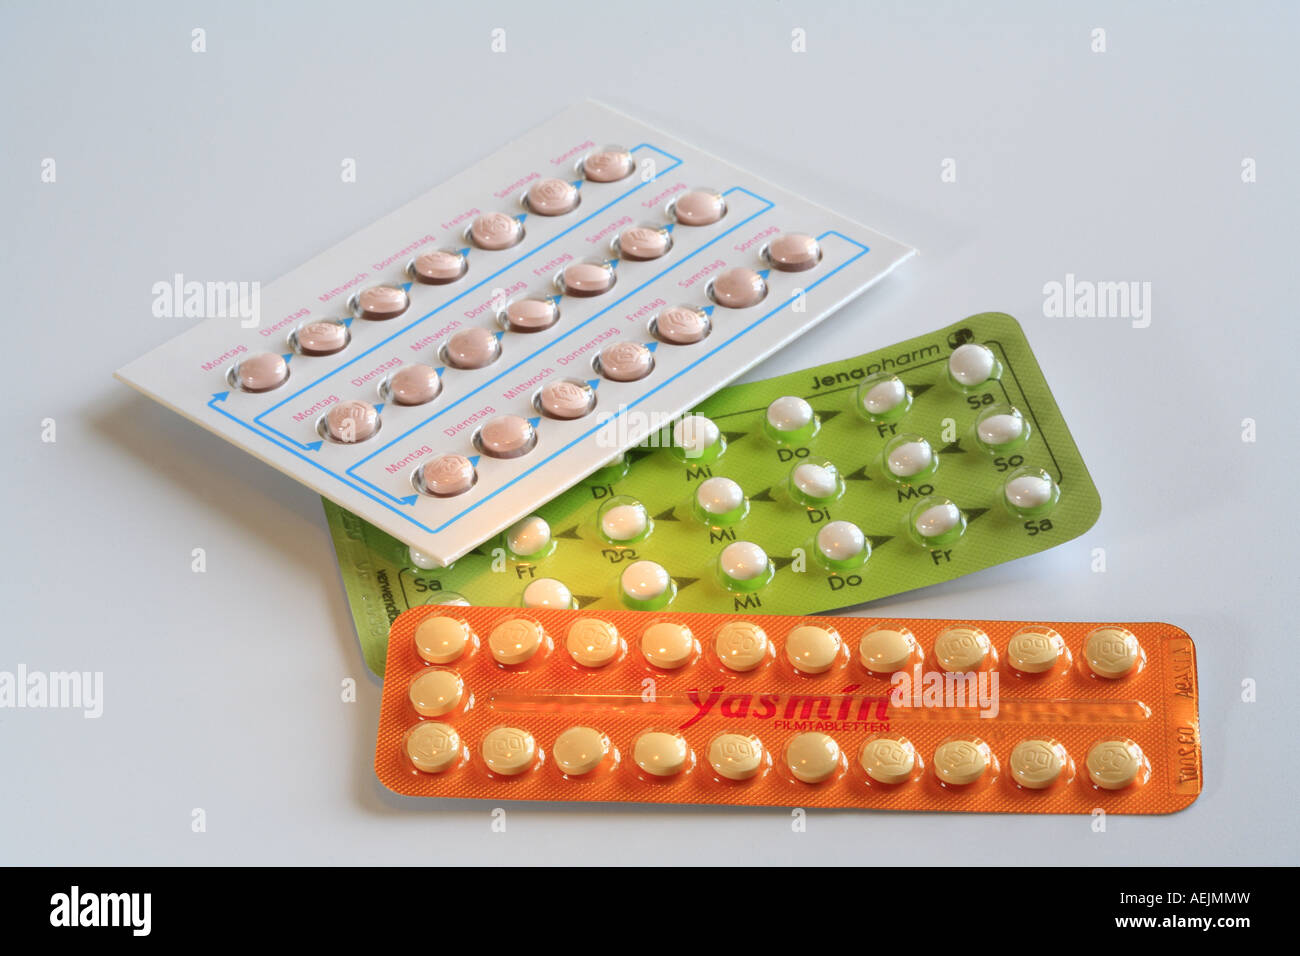 Contraceptive pill, one month packs Stock Photo